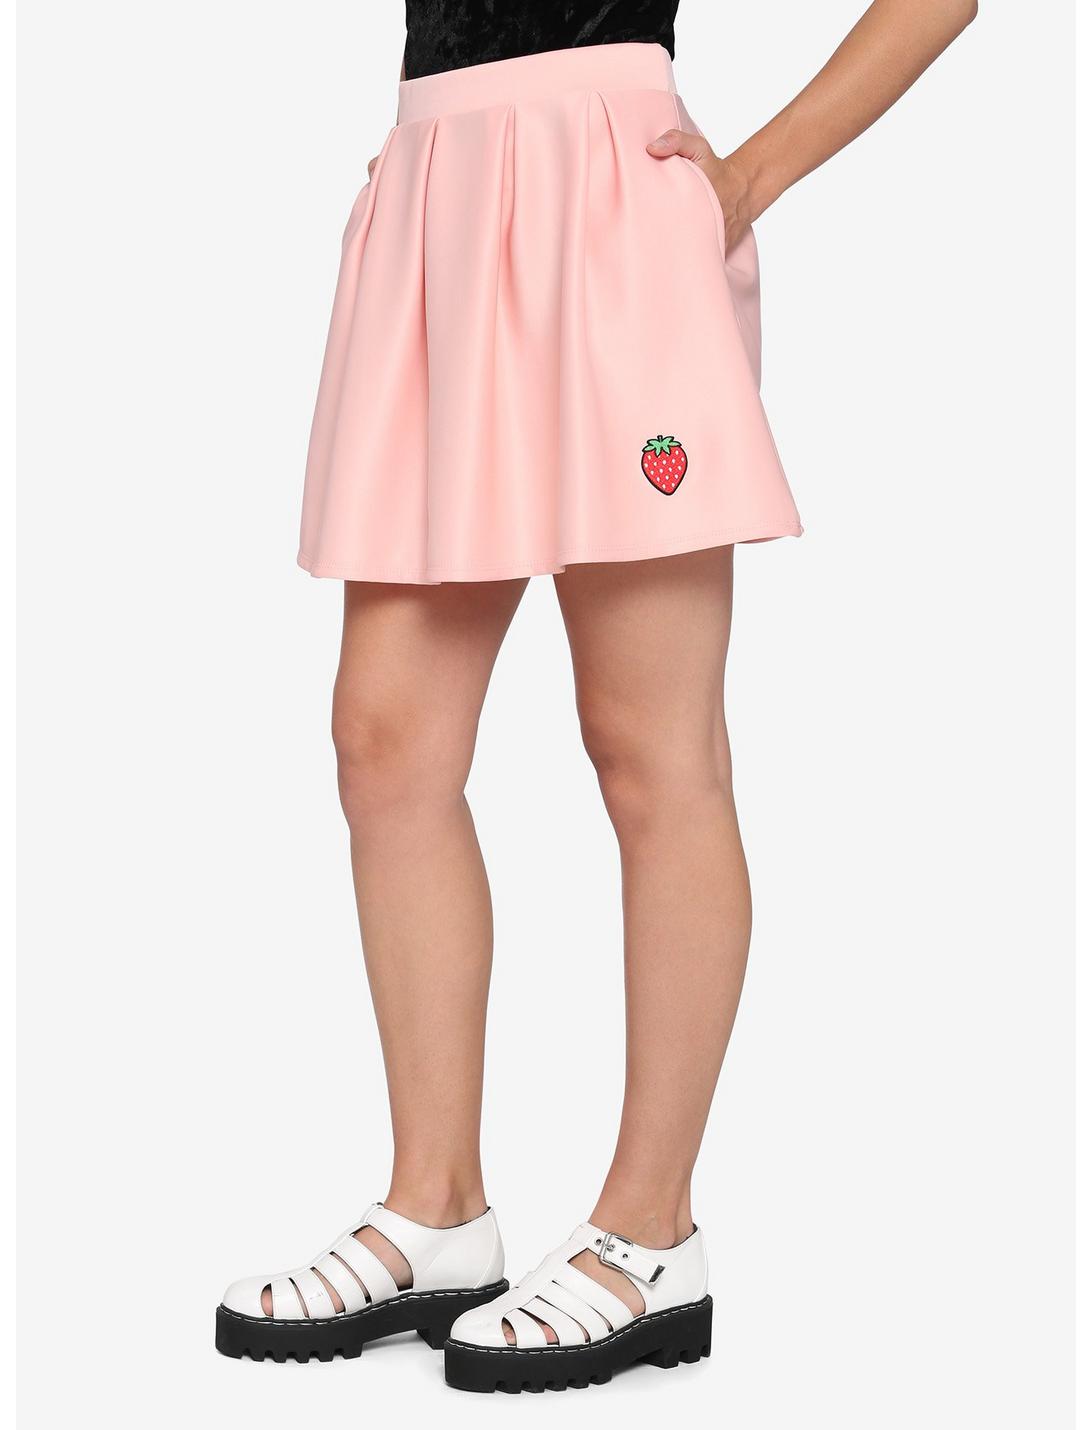 Strawberry Pastel Pink Pleated Skirt, PINK, hi-res